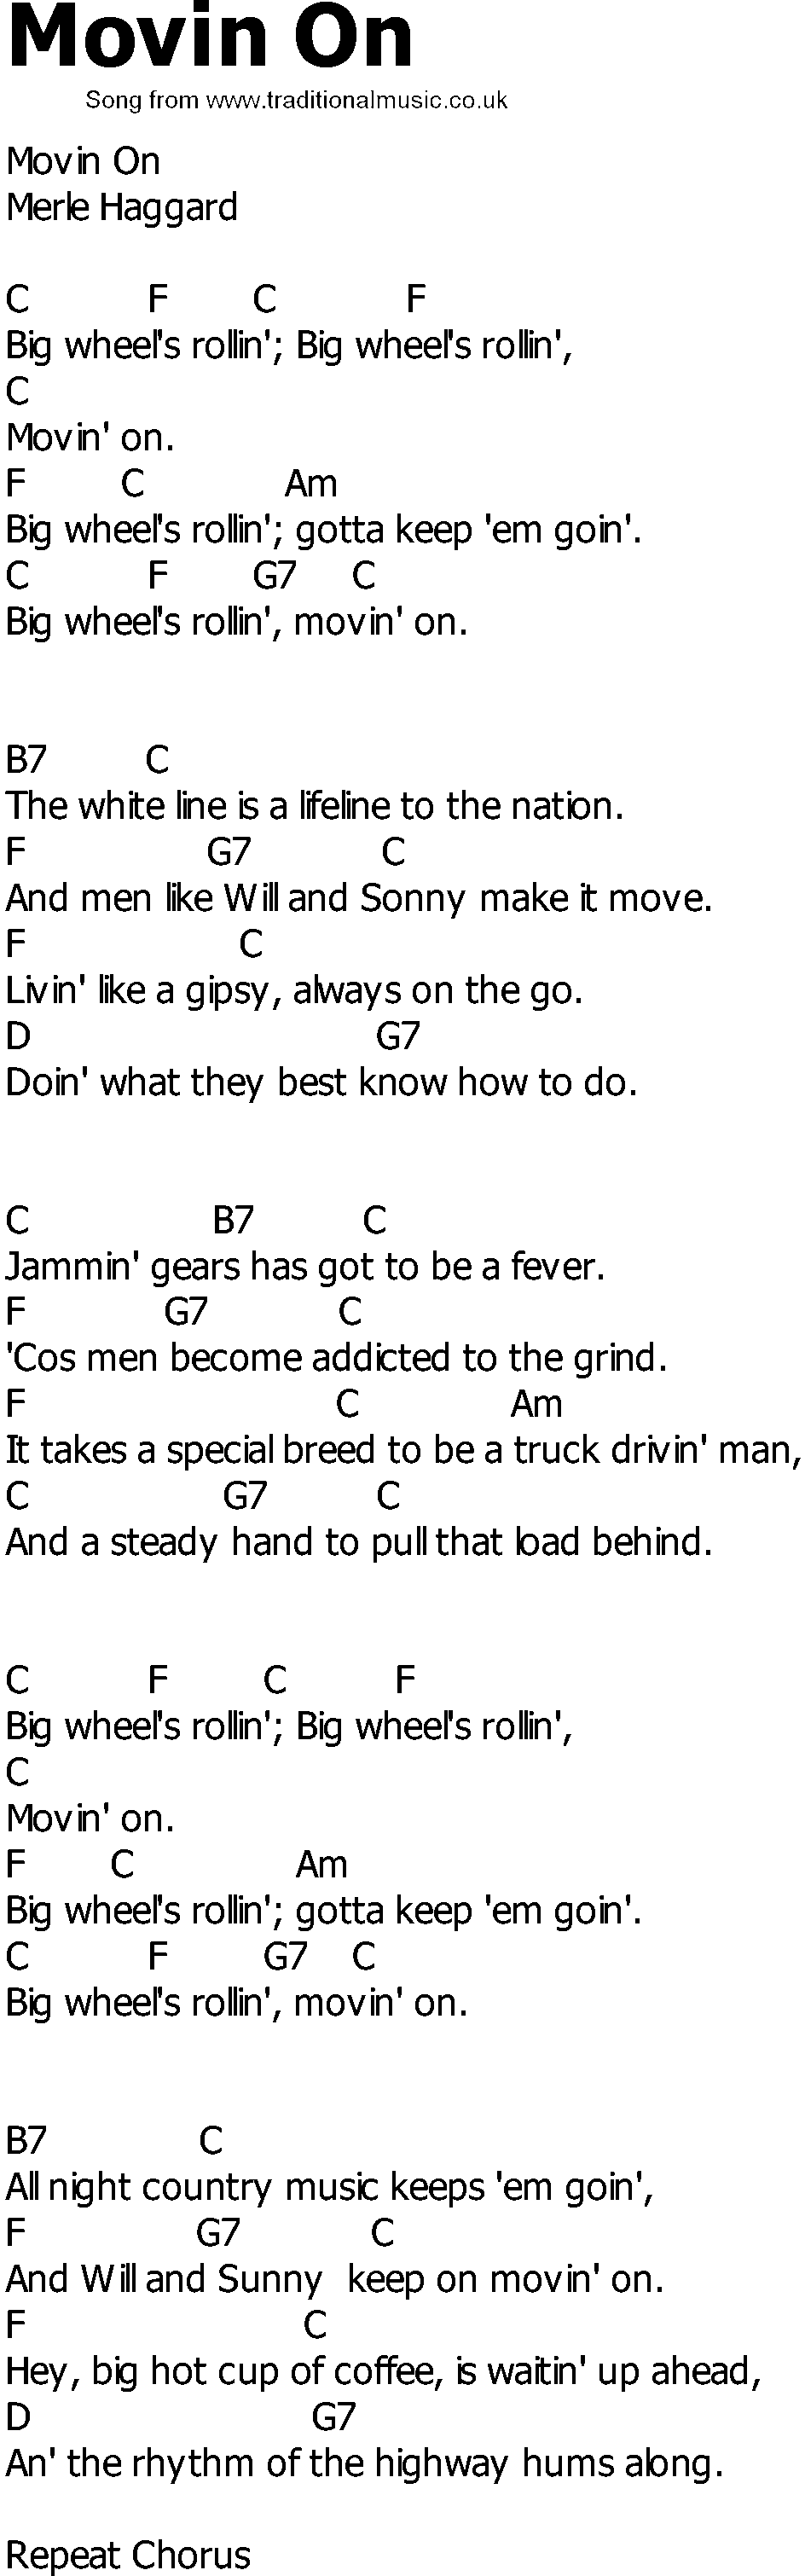 Old Country song lyrics with chords - Movin On